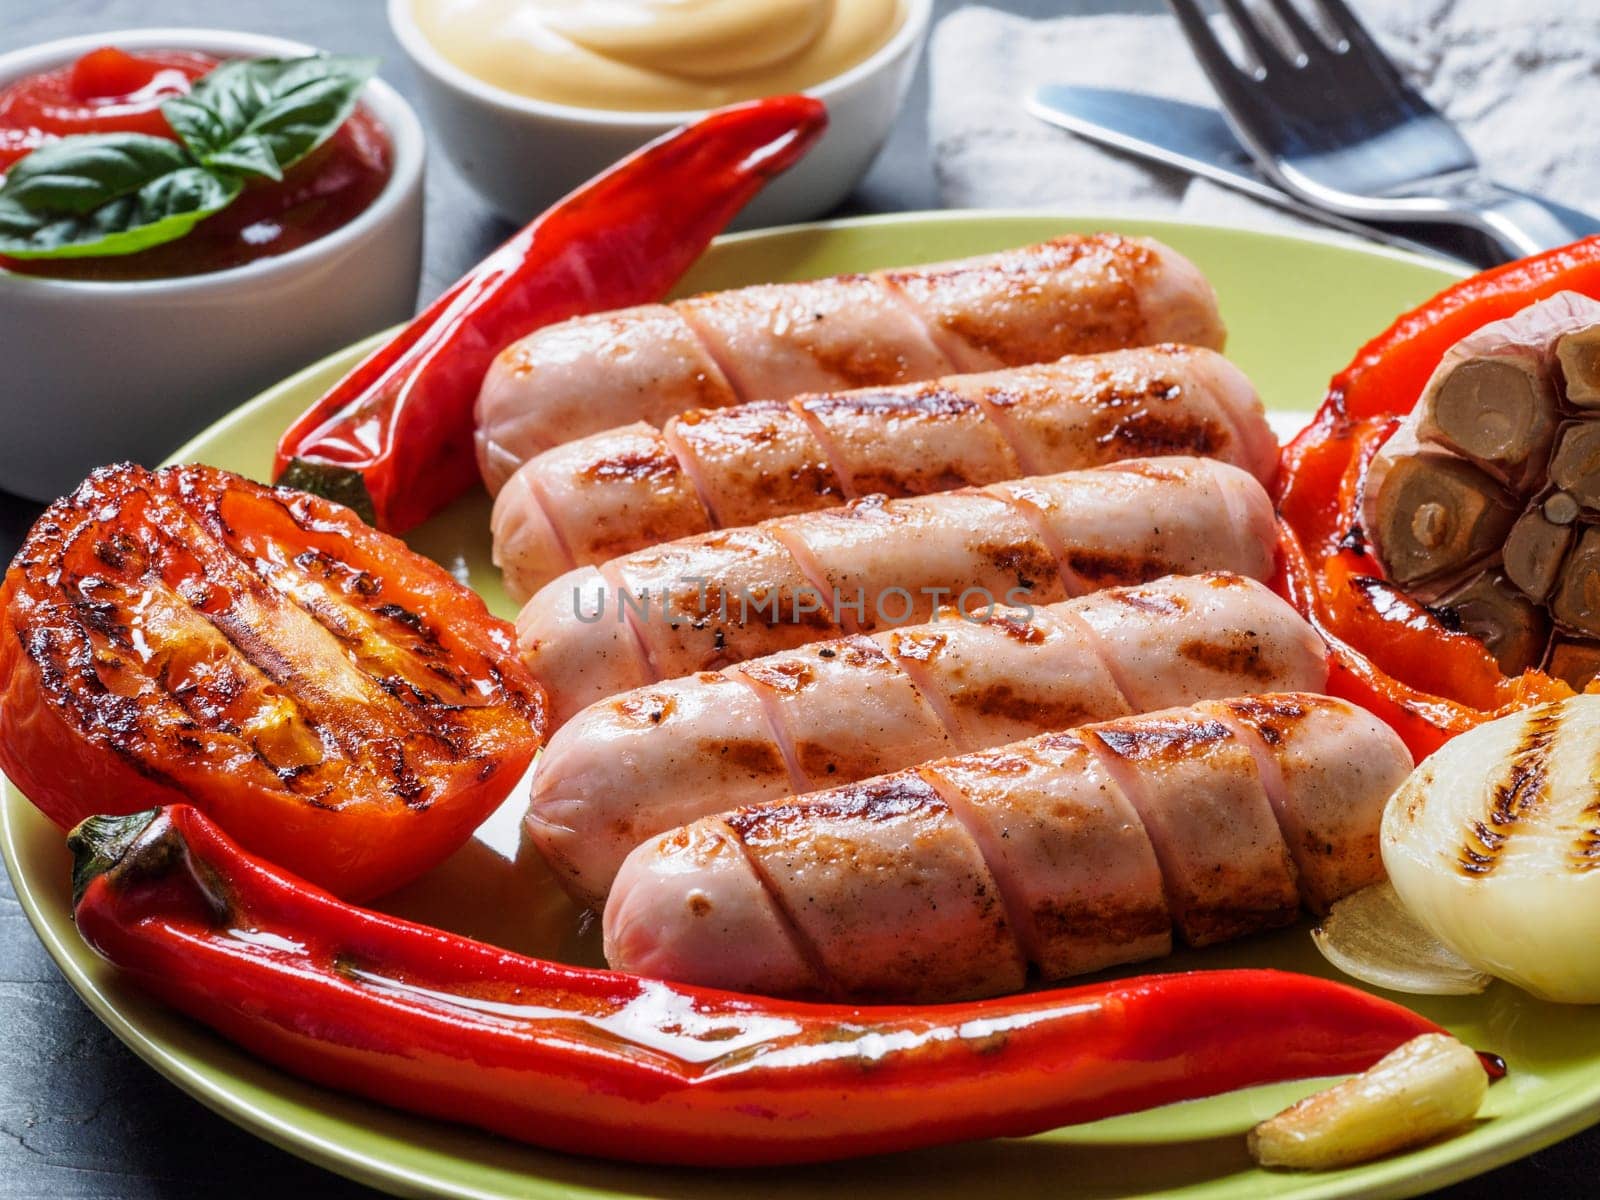 Close up view of chicken homemade sausages with sauces ketchup and mustard. Grilled sausages and grilled vegetables in green plate. Copy space.